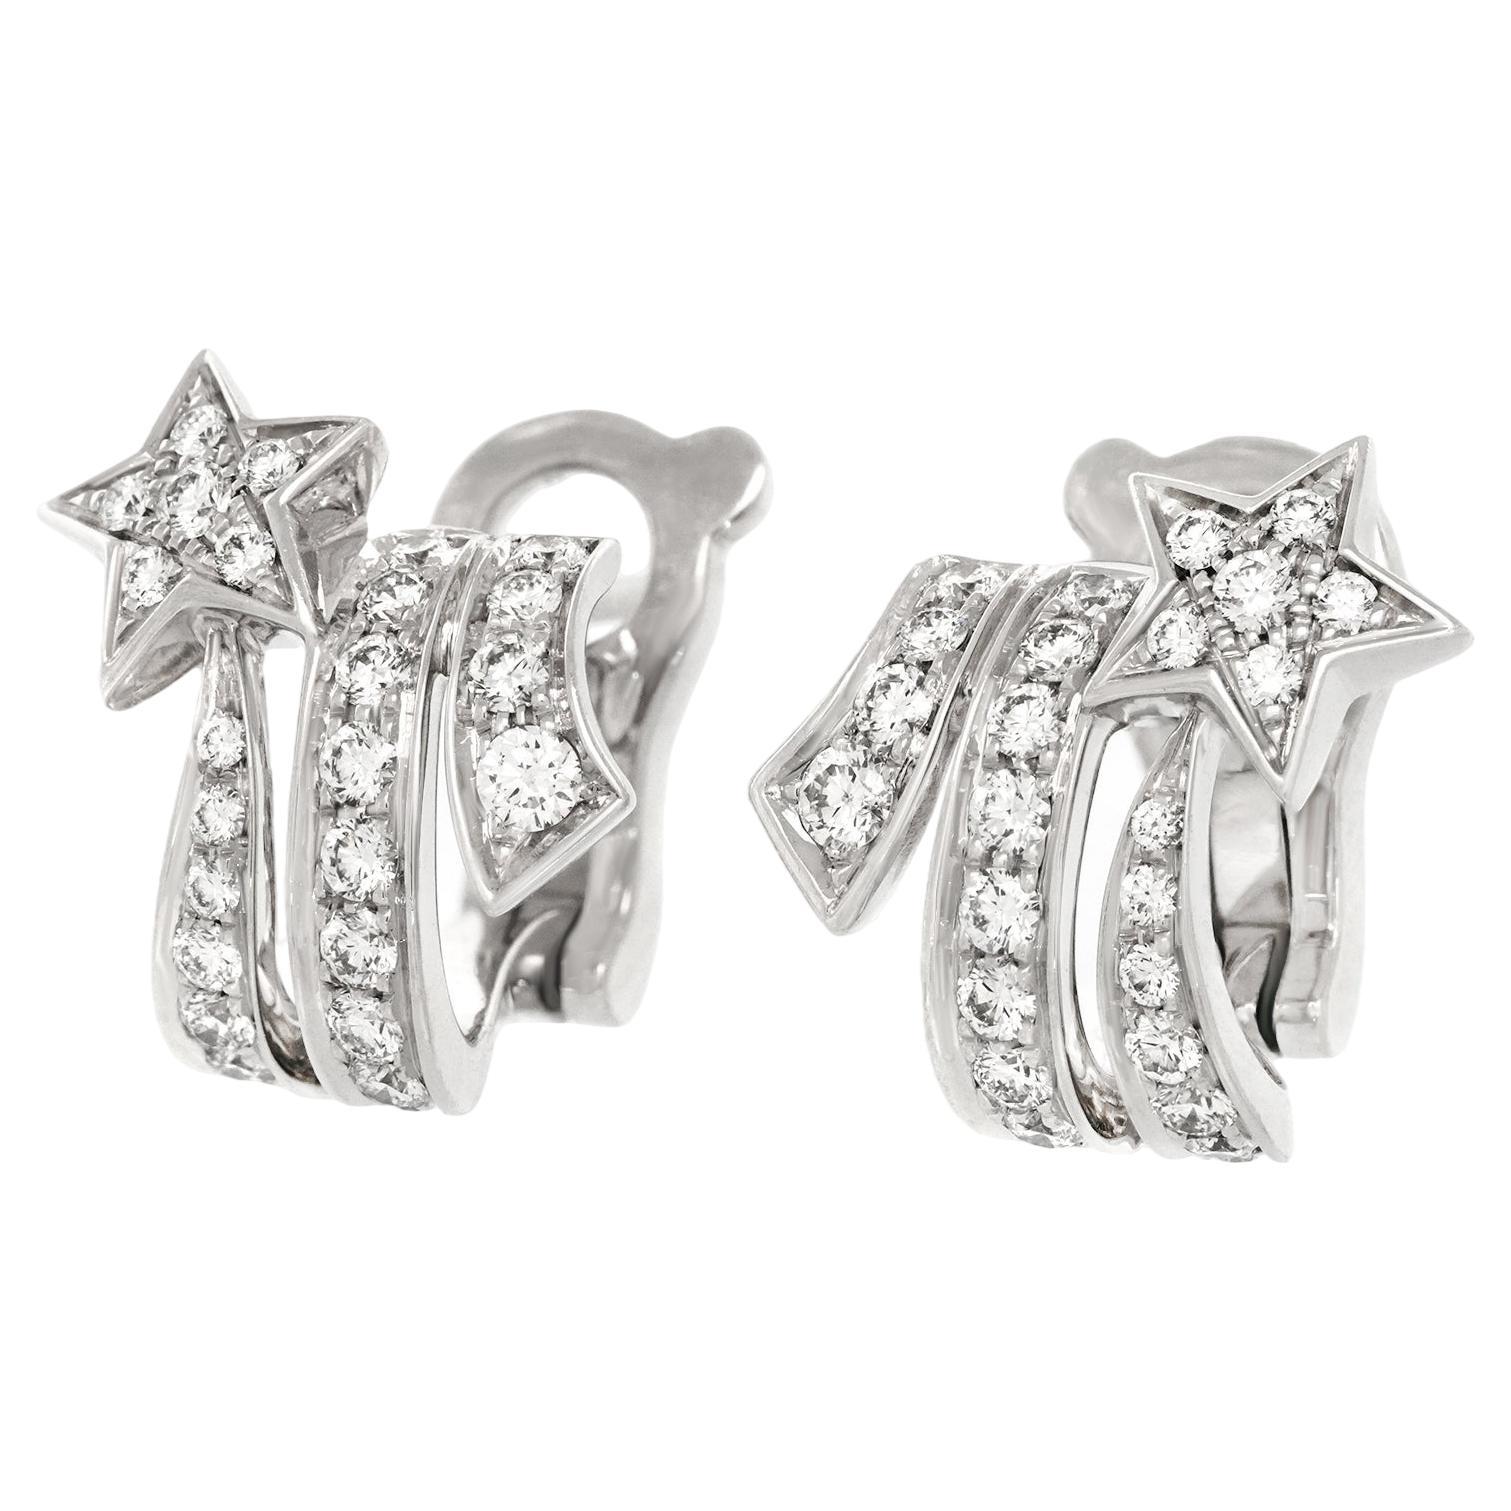 Sold at Auction: PAIR OF CHANEL STYLE DIAMOND EARRINGS